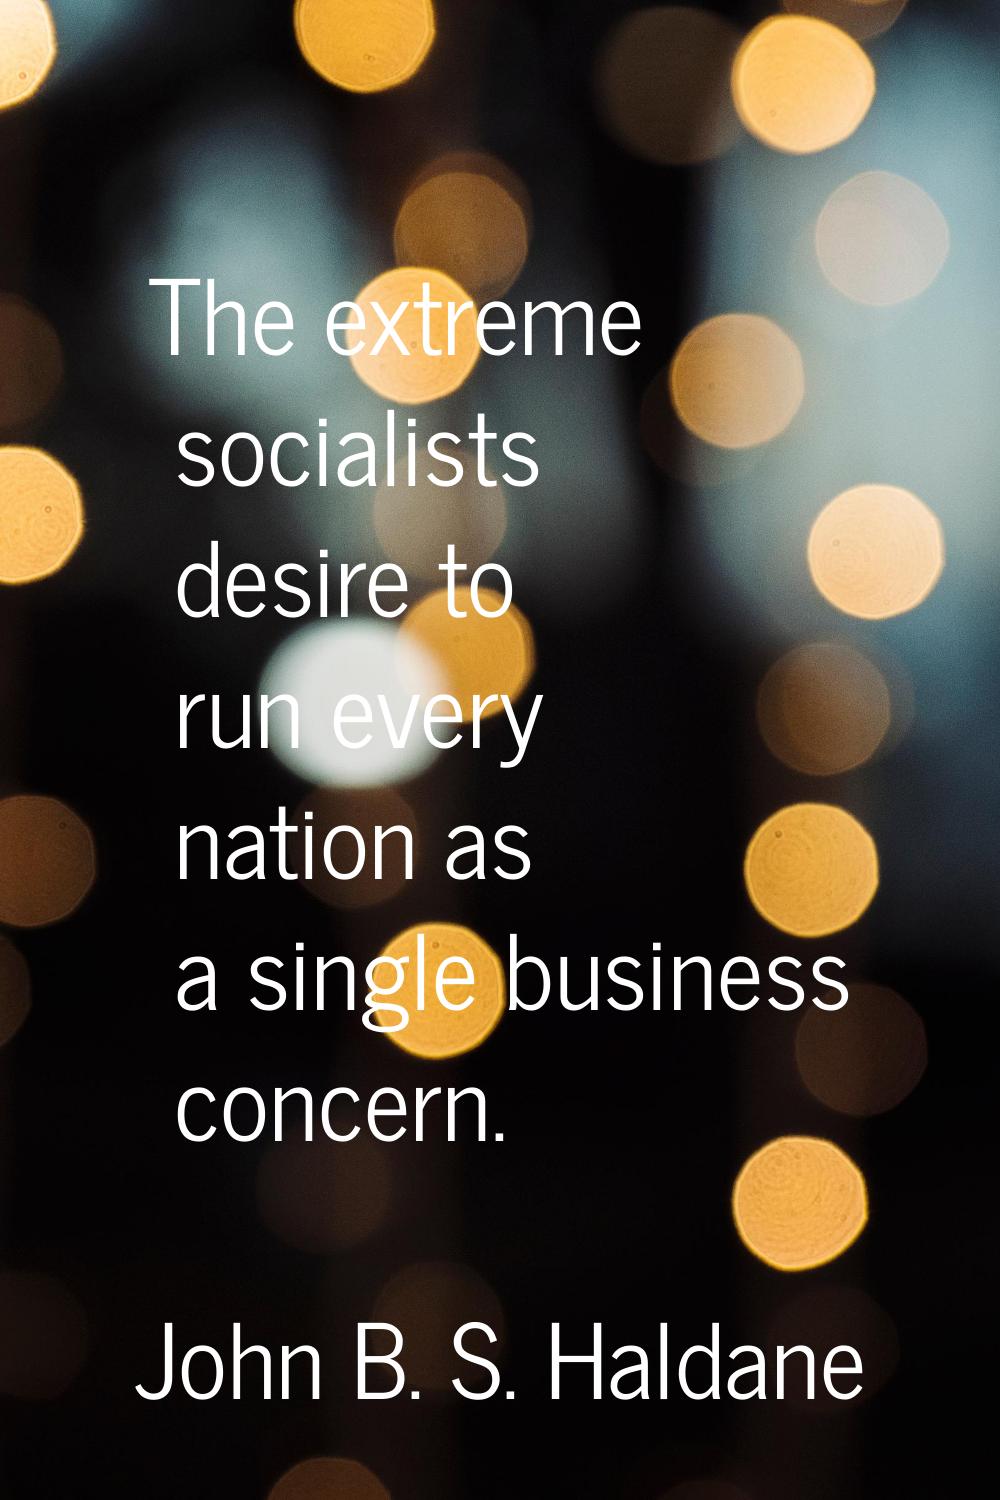 The extreme socialists desire to run every nation as a single business concern.